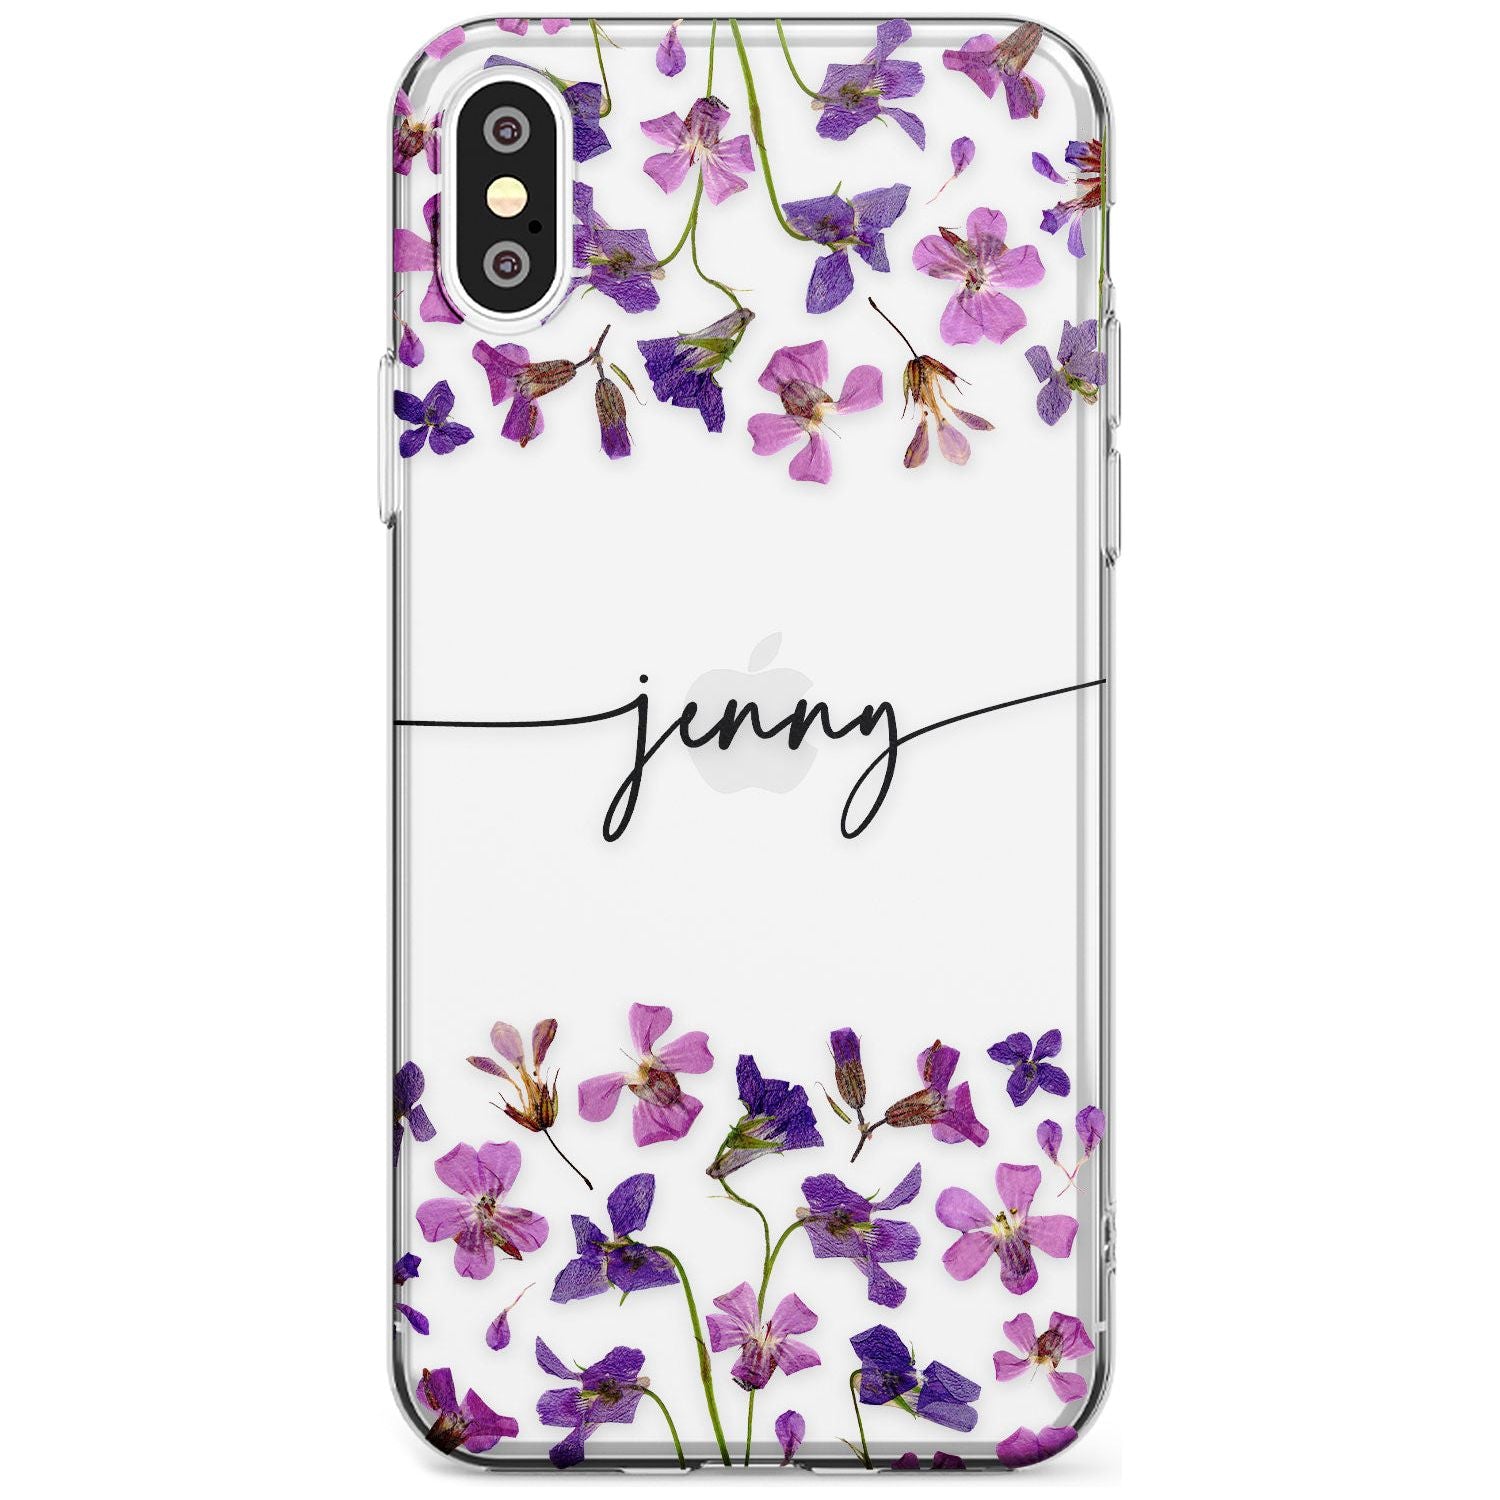 Custom Violet Flowers Black Impact Phone Case for iPhone X XS Max XR